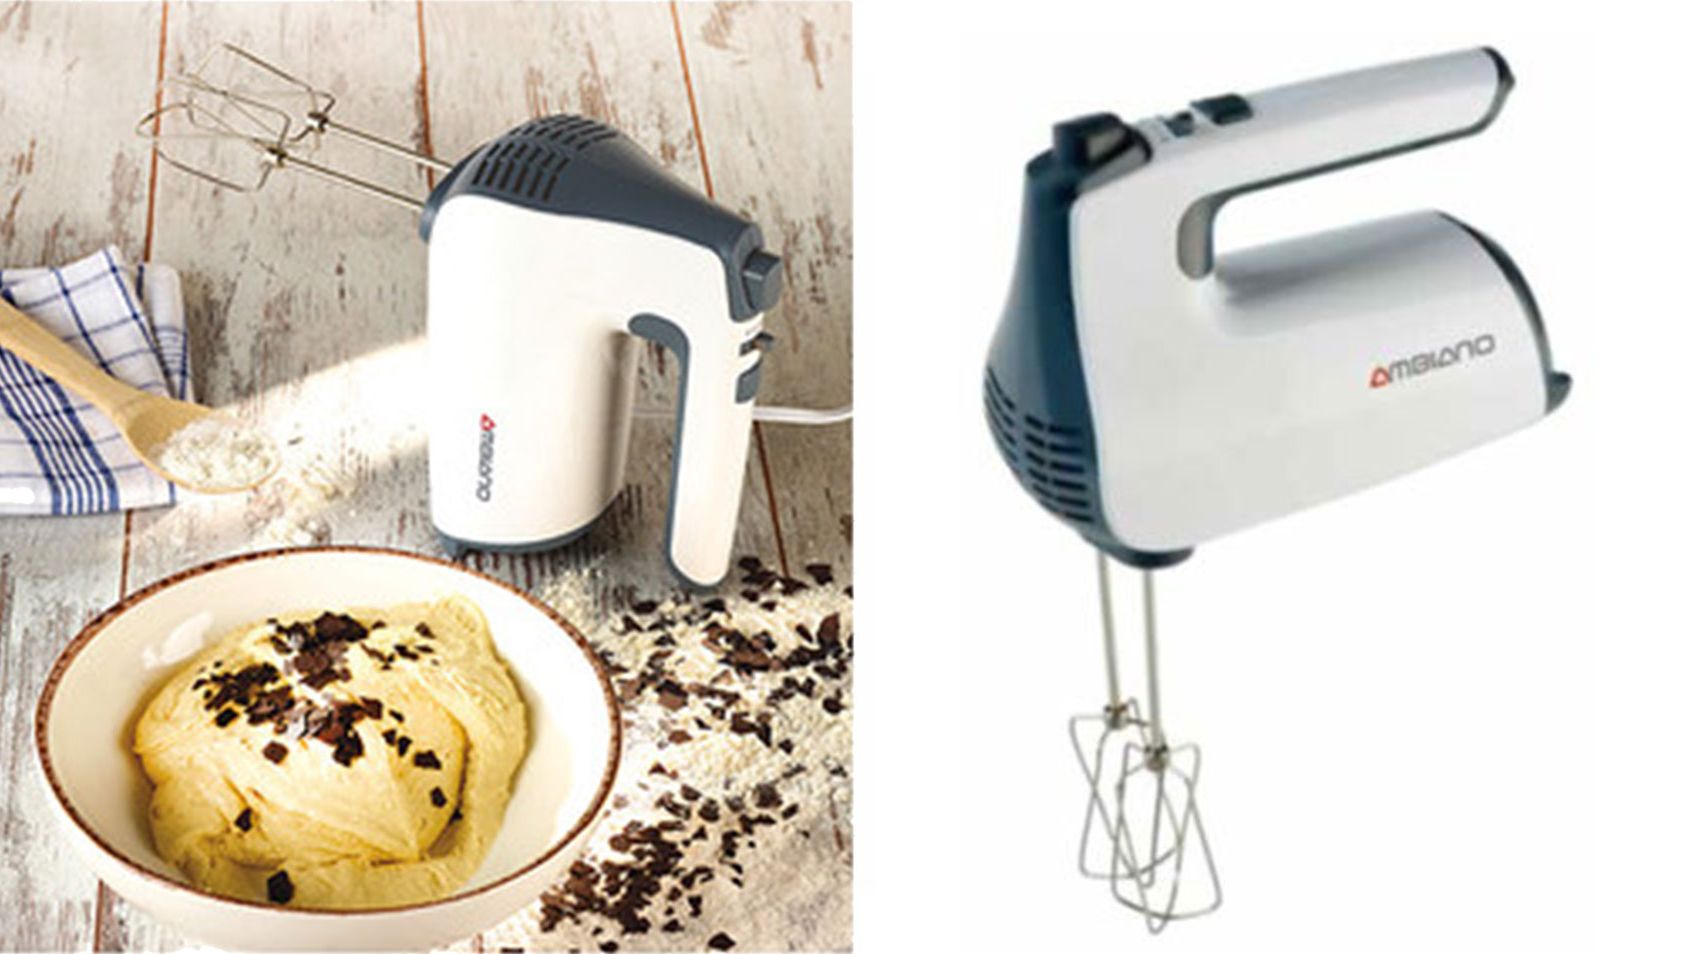 Aldi shoppers go wild for KitchenAid inspired mixer - and it's